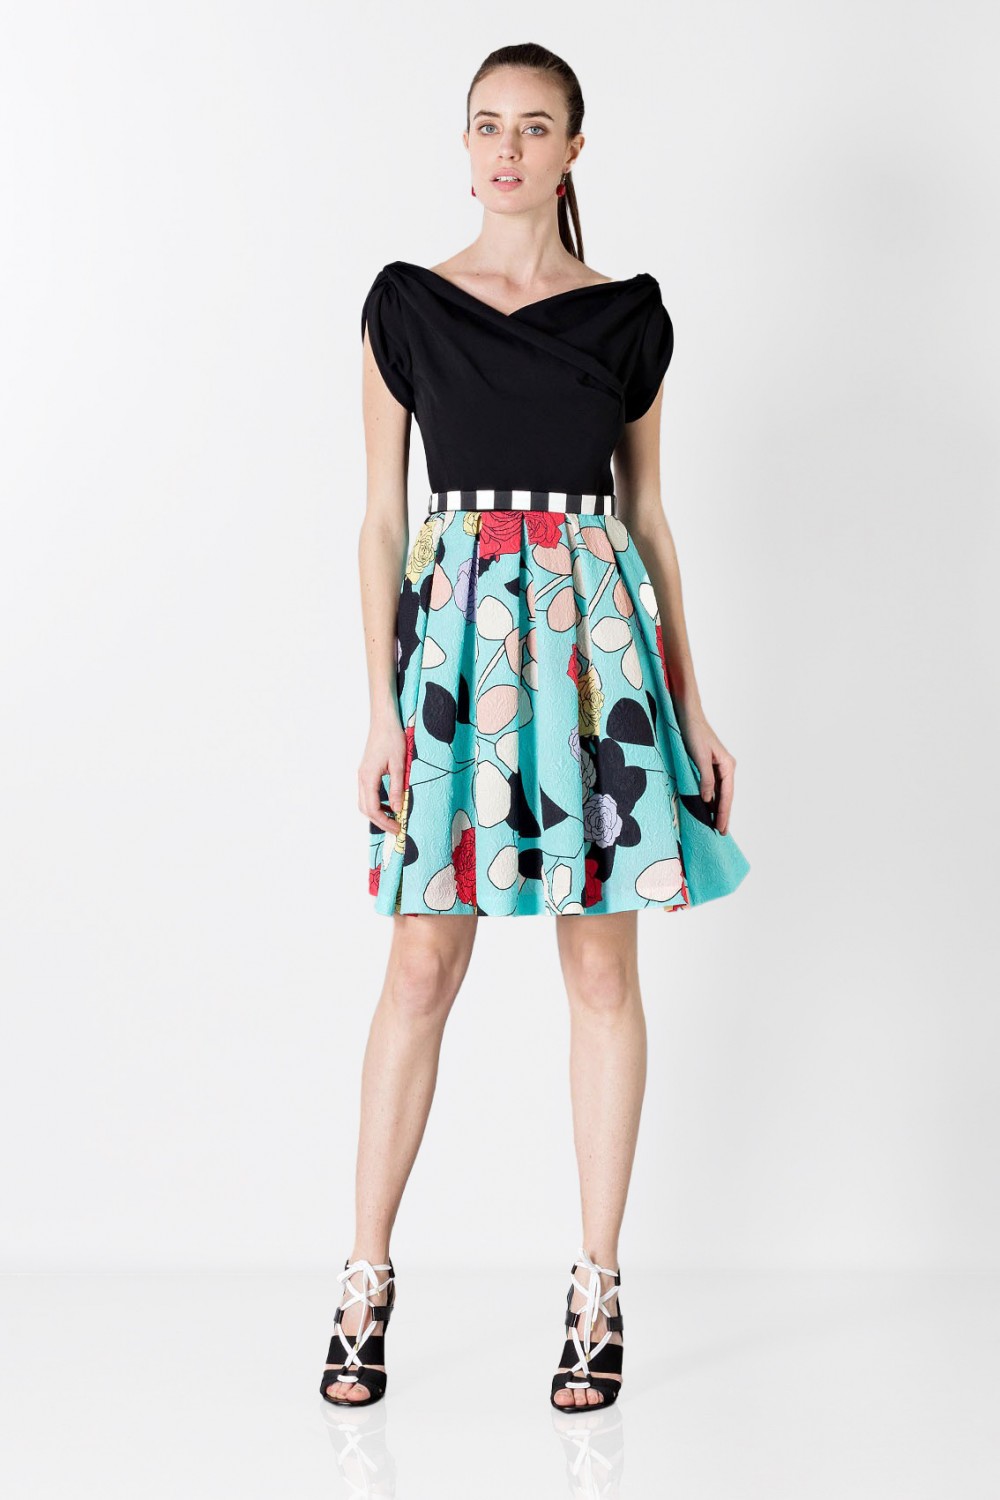  Patterned dress with boat neck